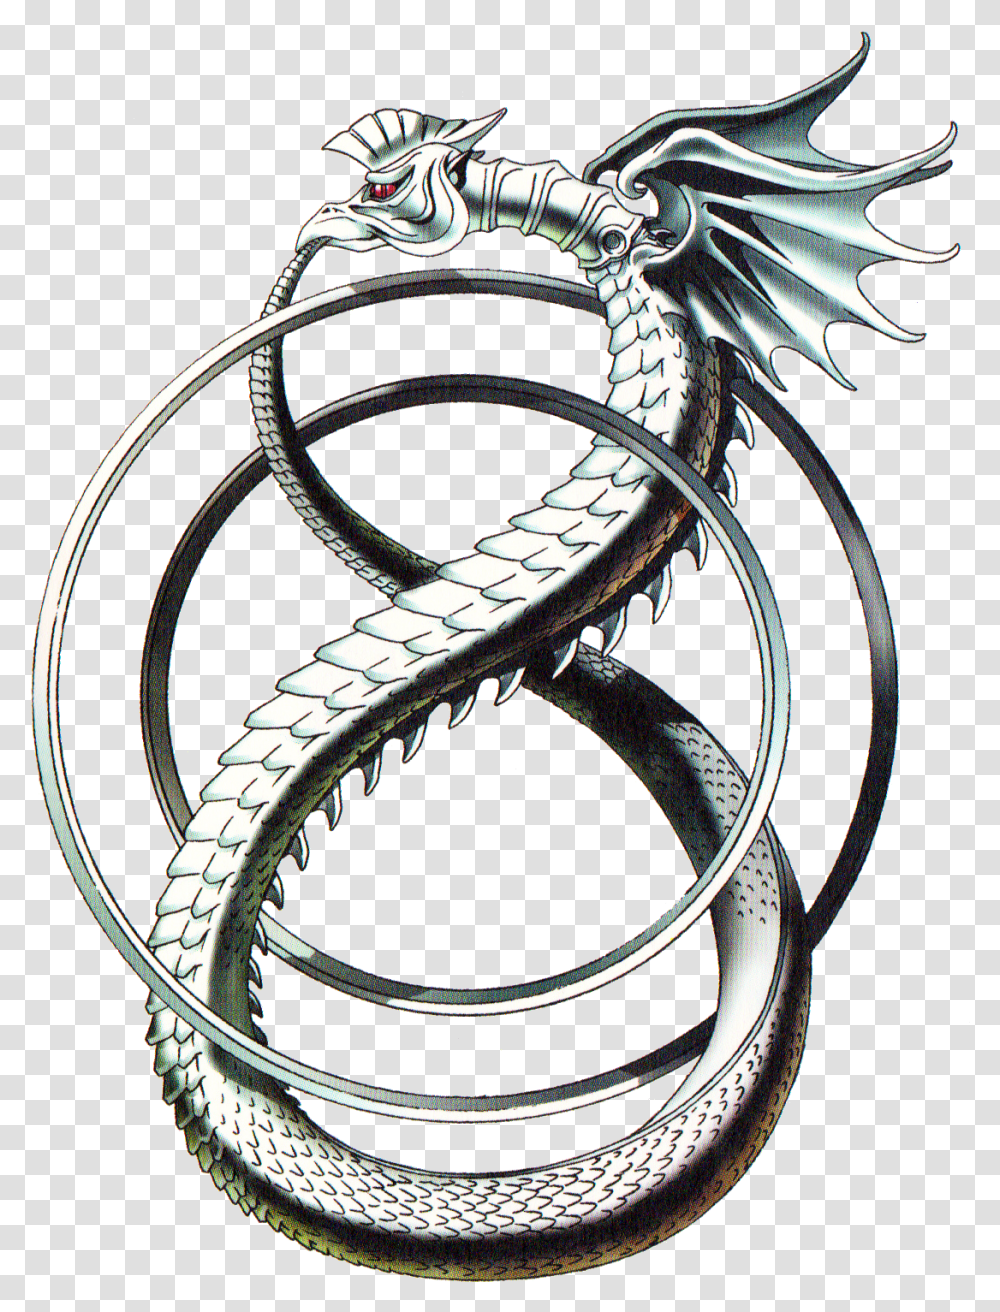 Ouroboros Images Shin Megami Tensei Ouroboros, Jewelry, Accessories, Accessory, Crystal Transparent Png